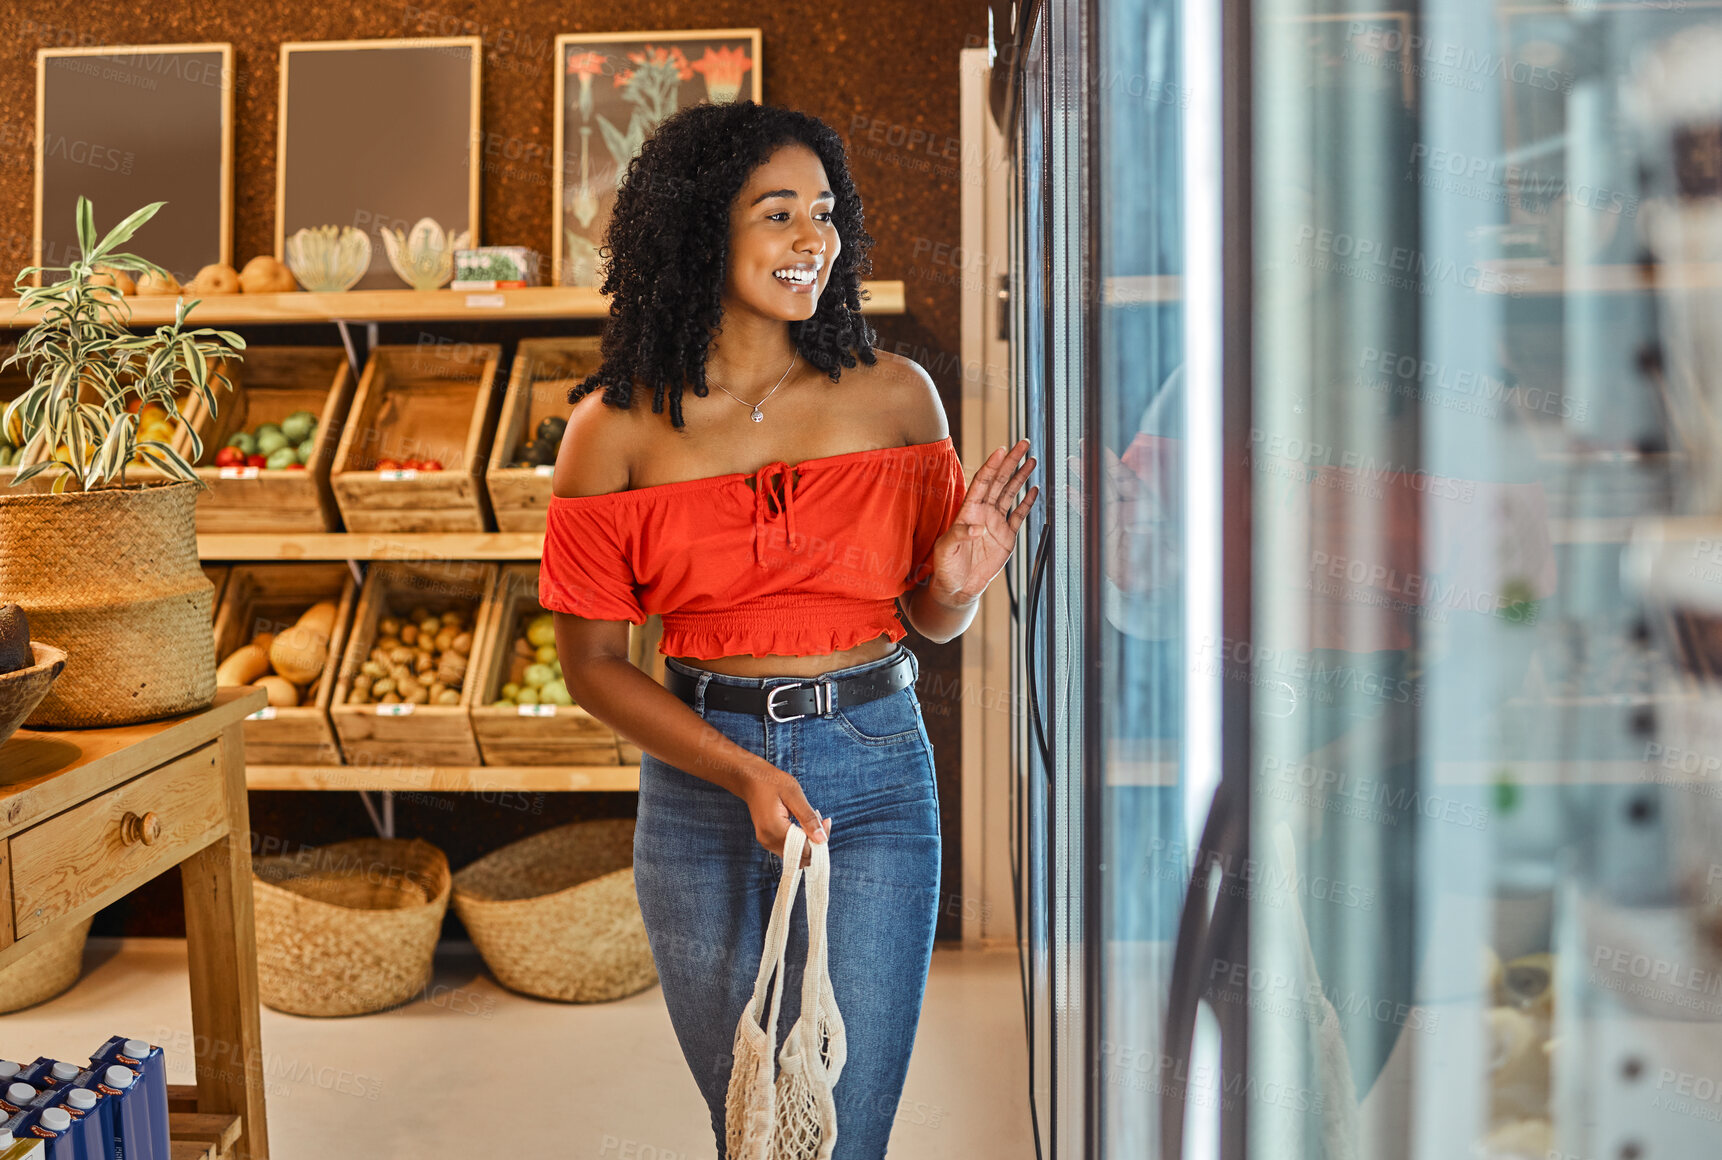 Buy stock photo Black woman, grocery shopping and supermarket, customer and food, smile by refrigerator and happy with retail discount. Young, cold storage product and organic with fresh groceries, sale and buy.